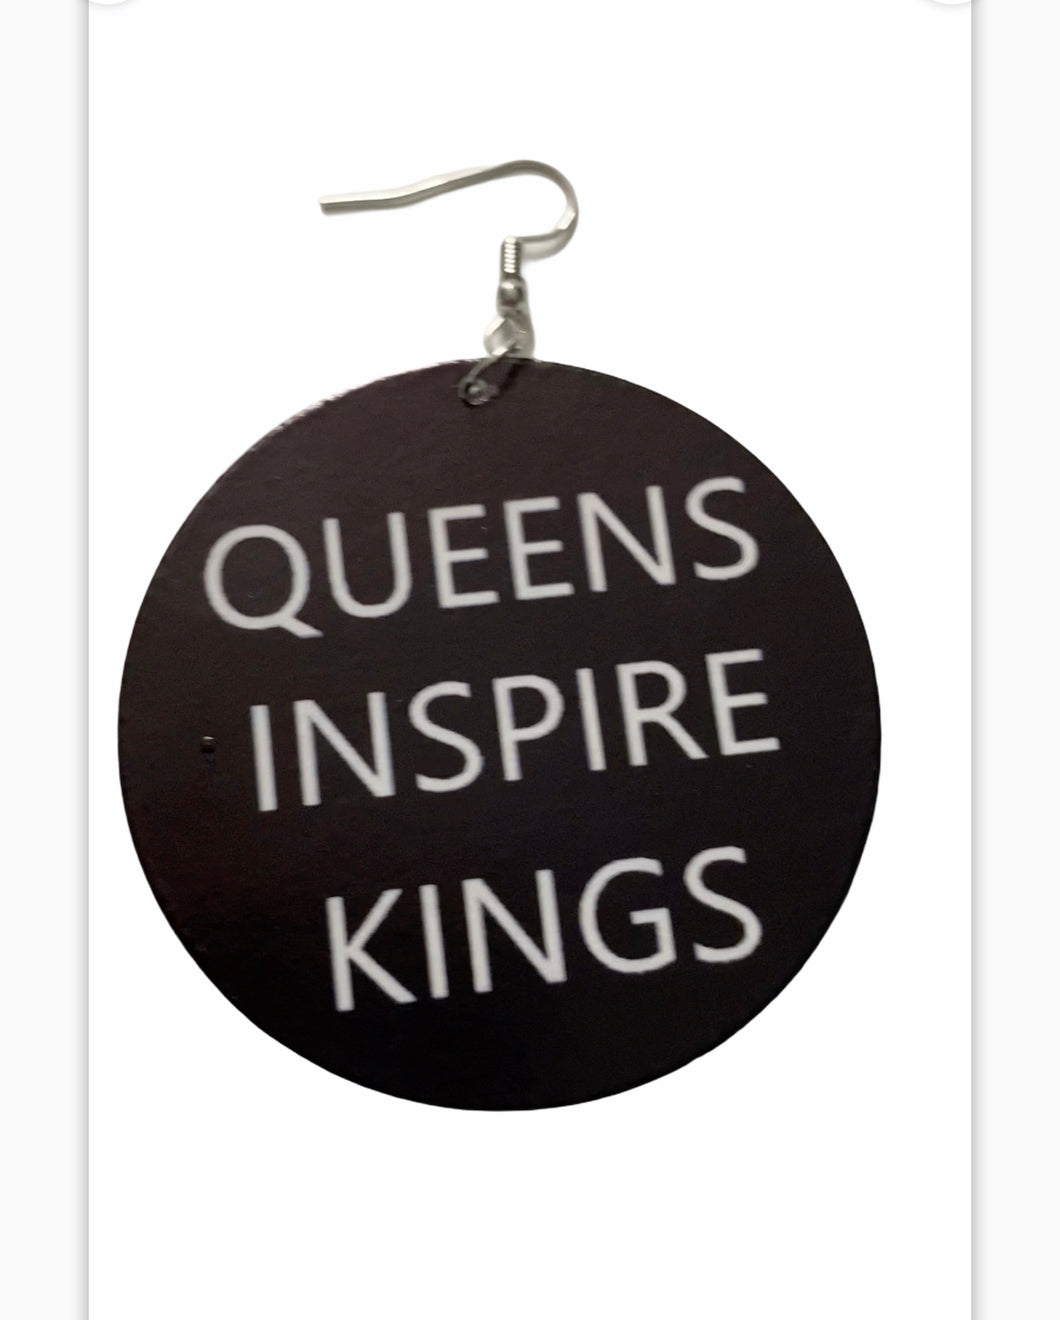 queens inspire kings earrings natural hair jewelry afrocentric accessories pro black earring accessory fashion outfit idea clothing gift urban cheap unique different kwanzaa christmas birthday 